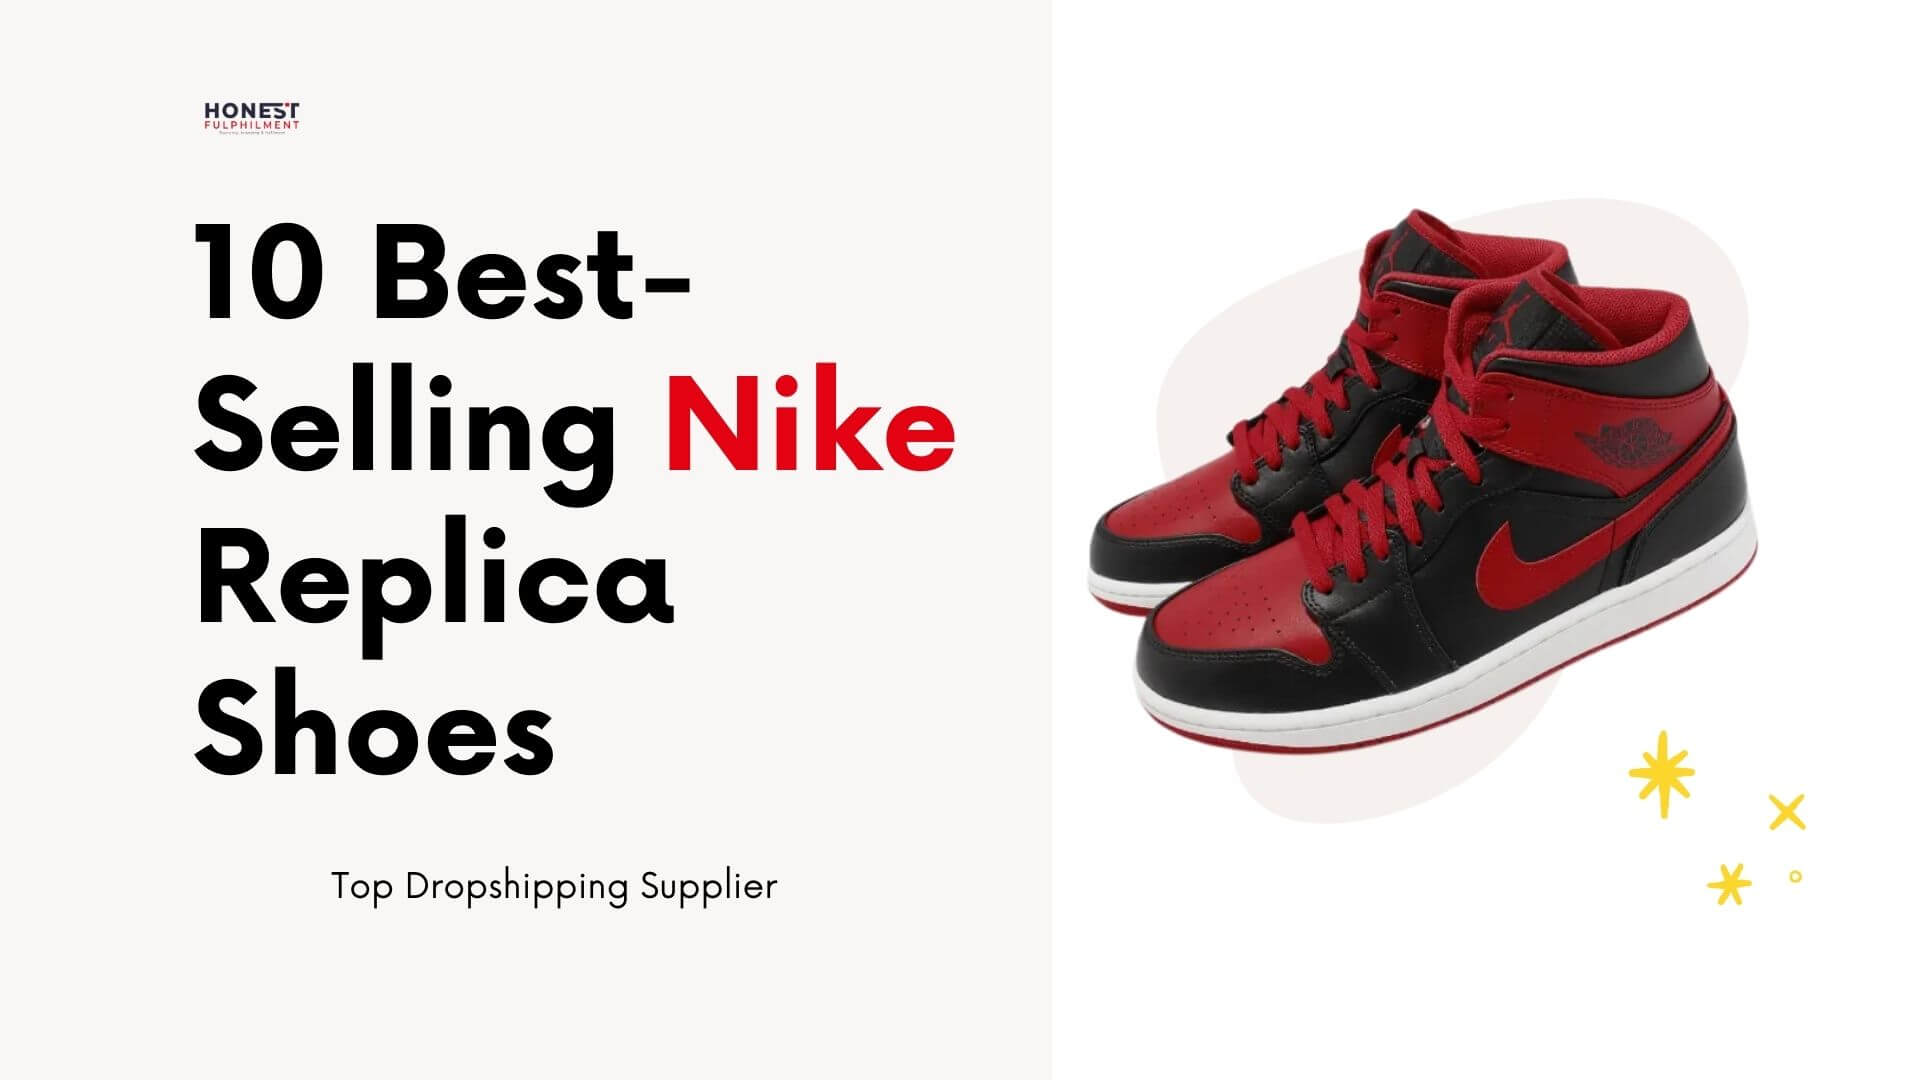 10 Best-Selling Nike Shoes & Suppliers 2023